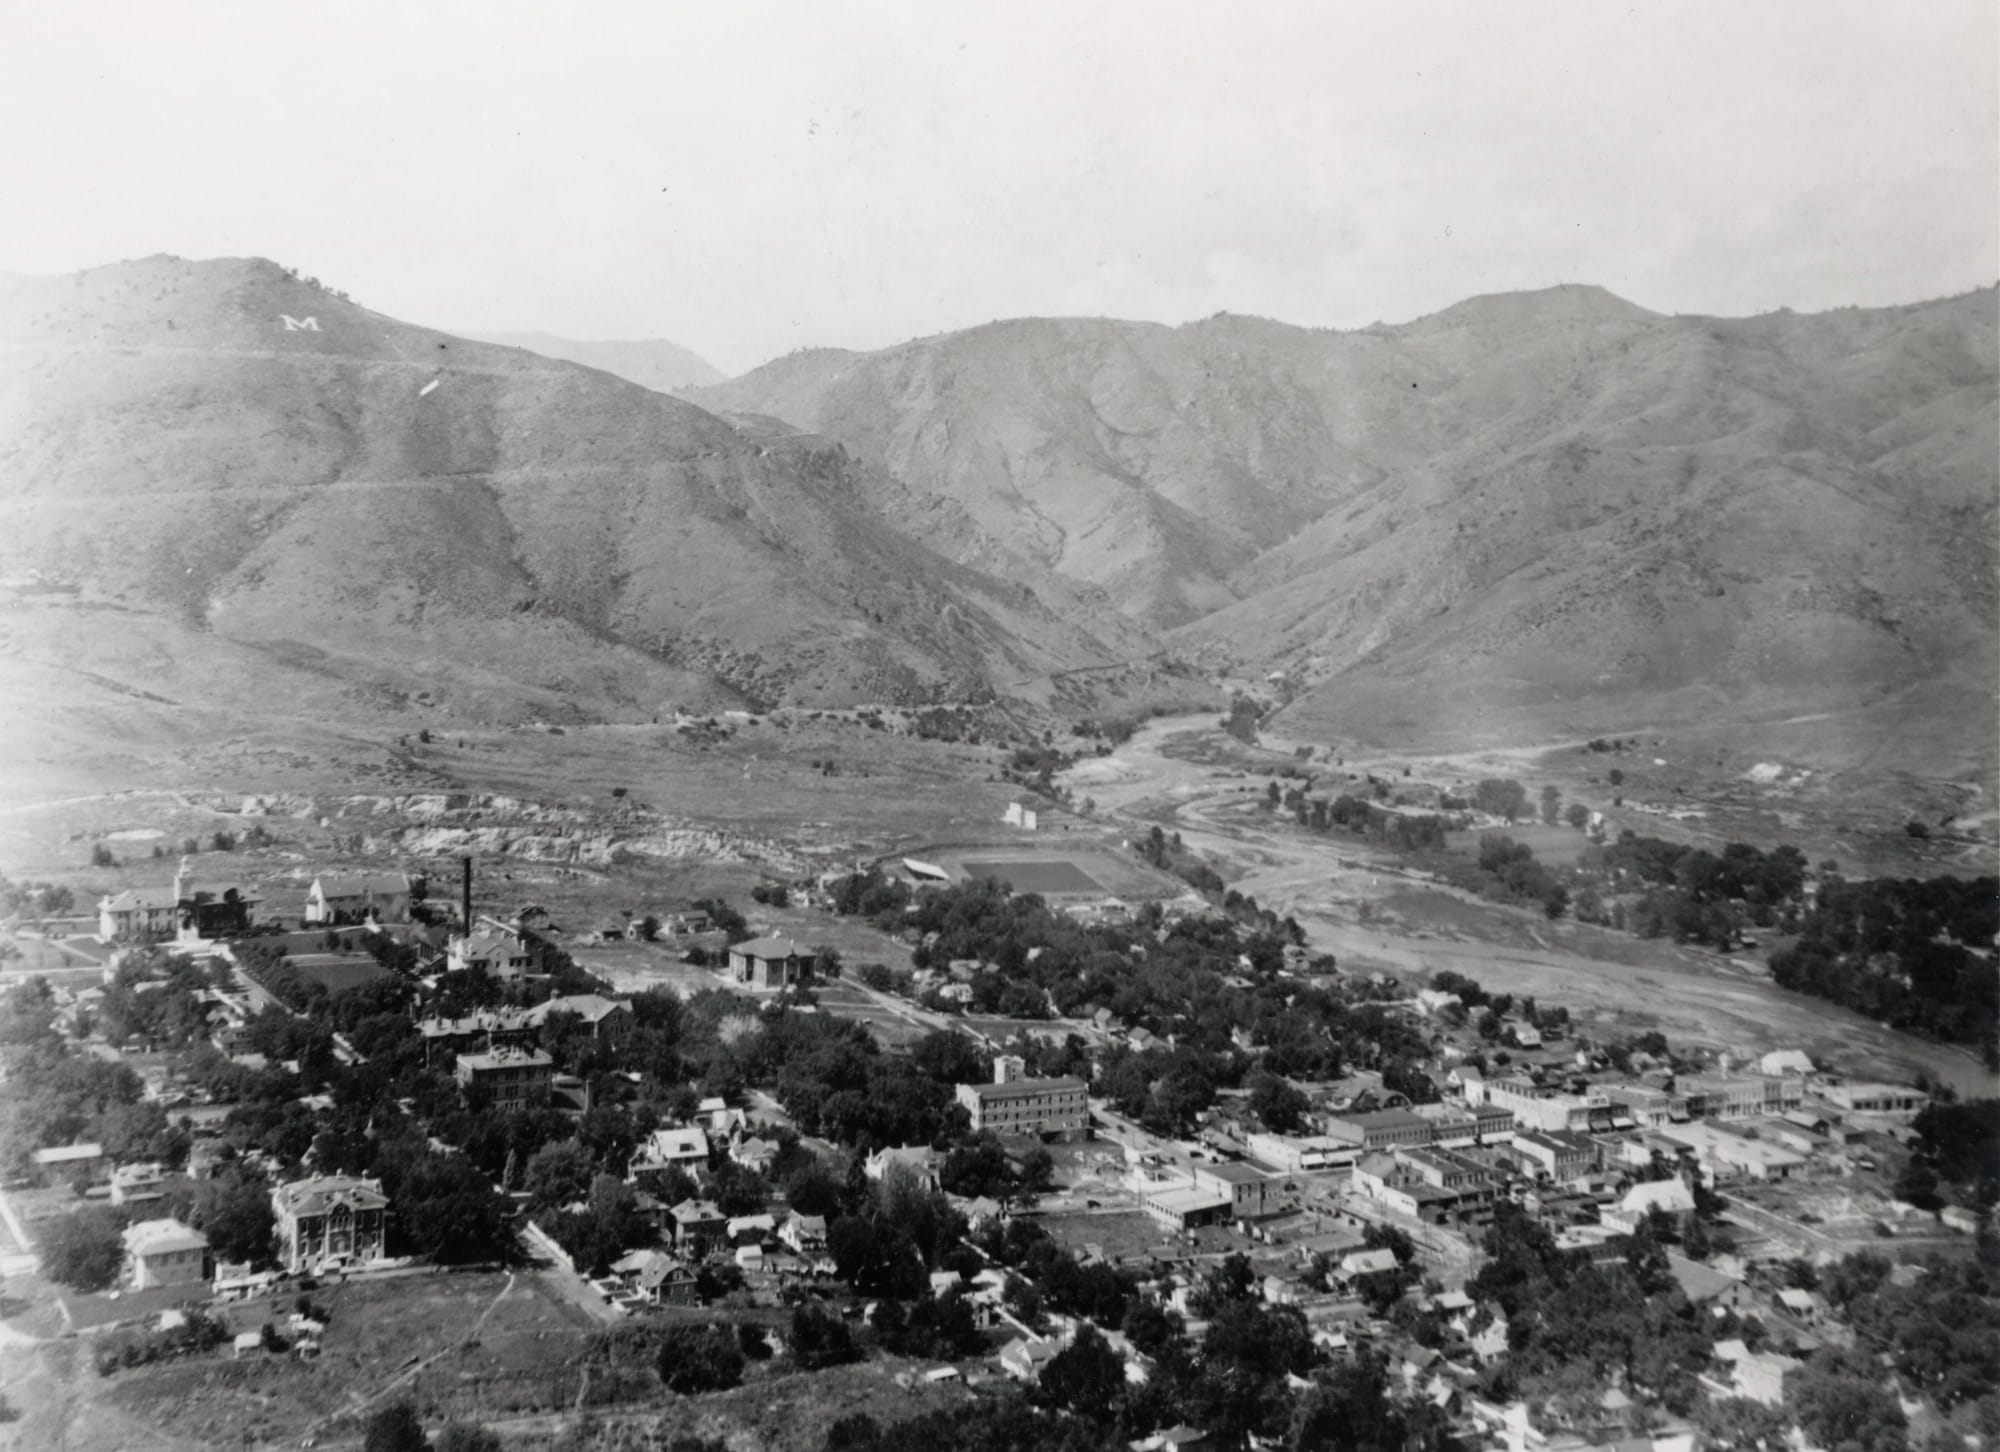 Later view of Golden from South Table Mountain, early 1930s, with many large trees